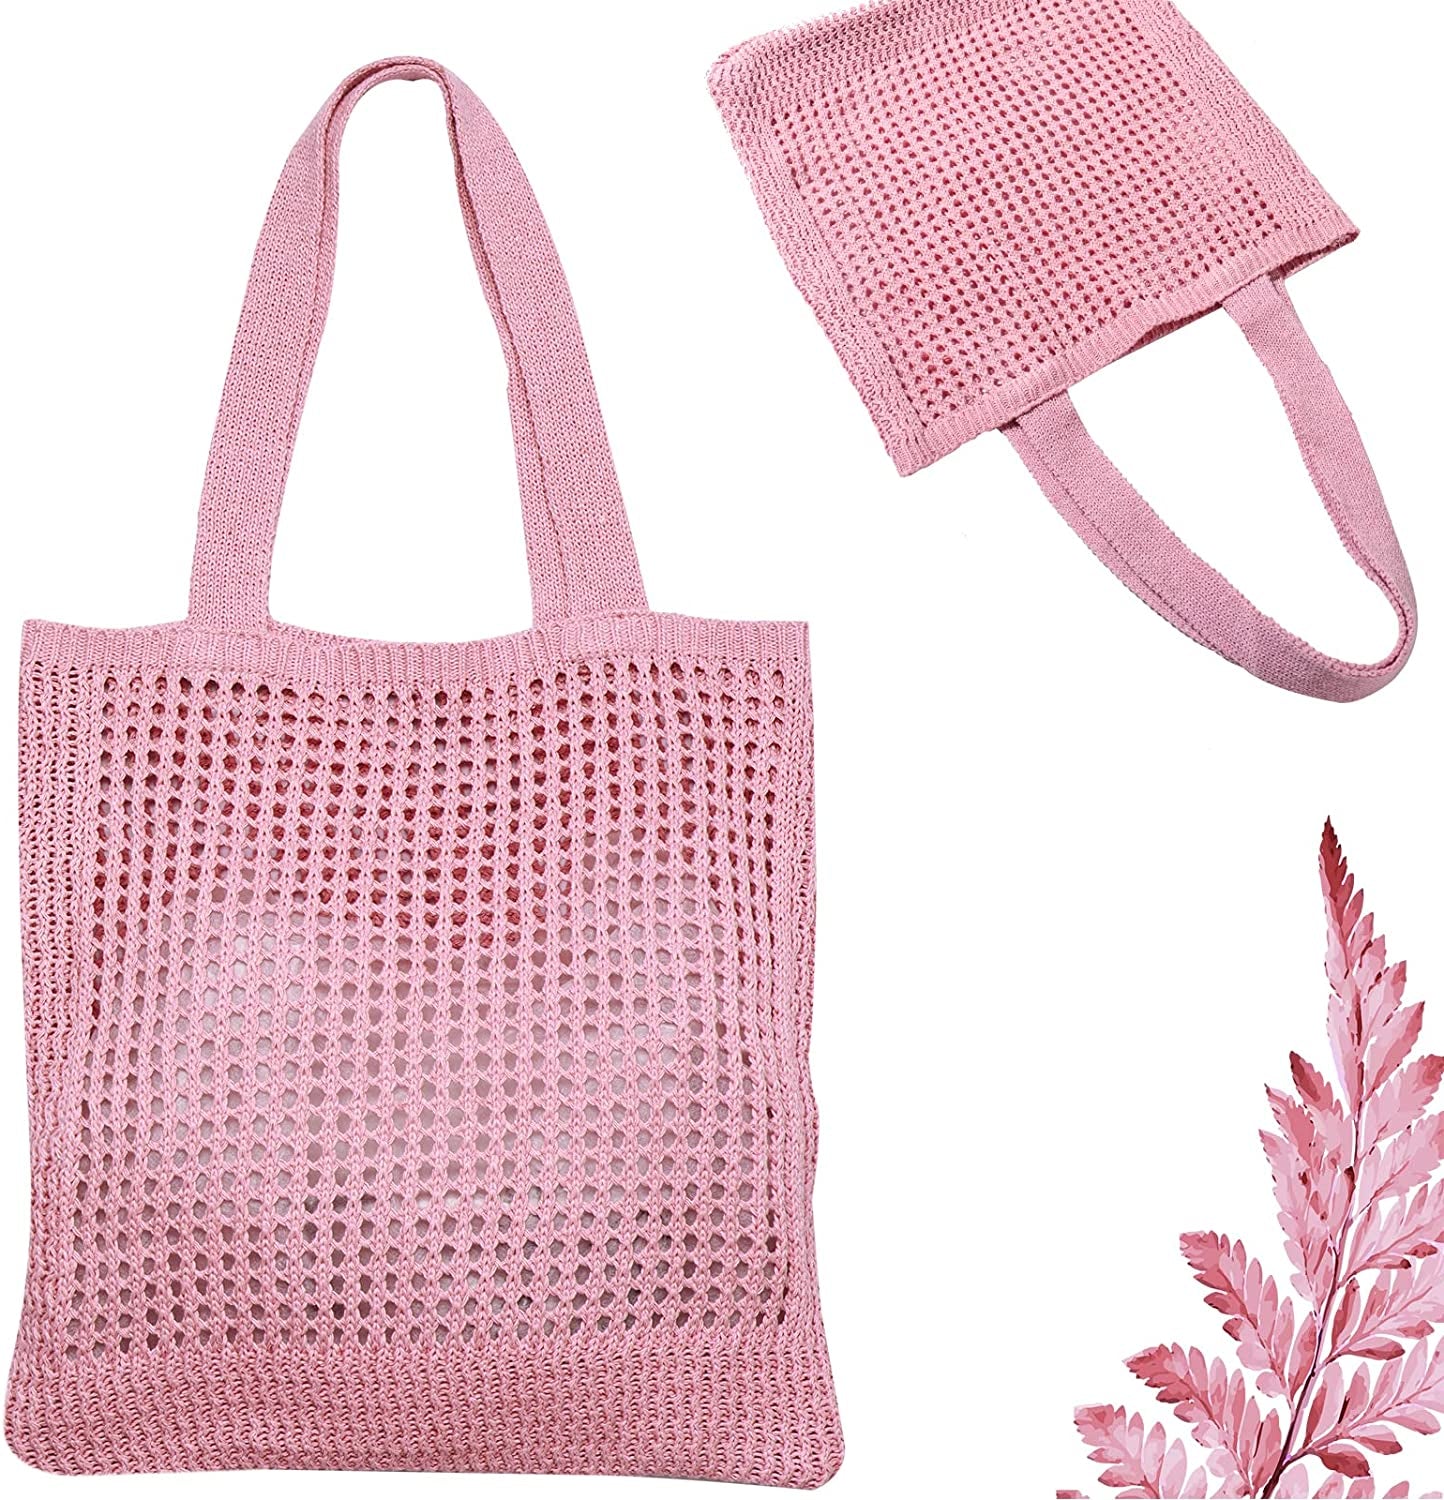 Straw Mesh Tote Bag for Women